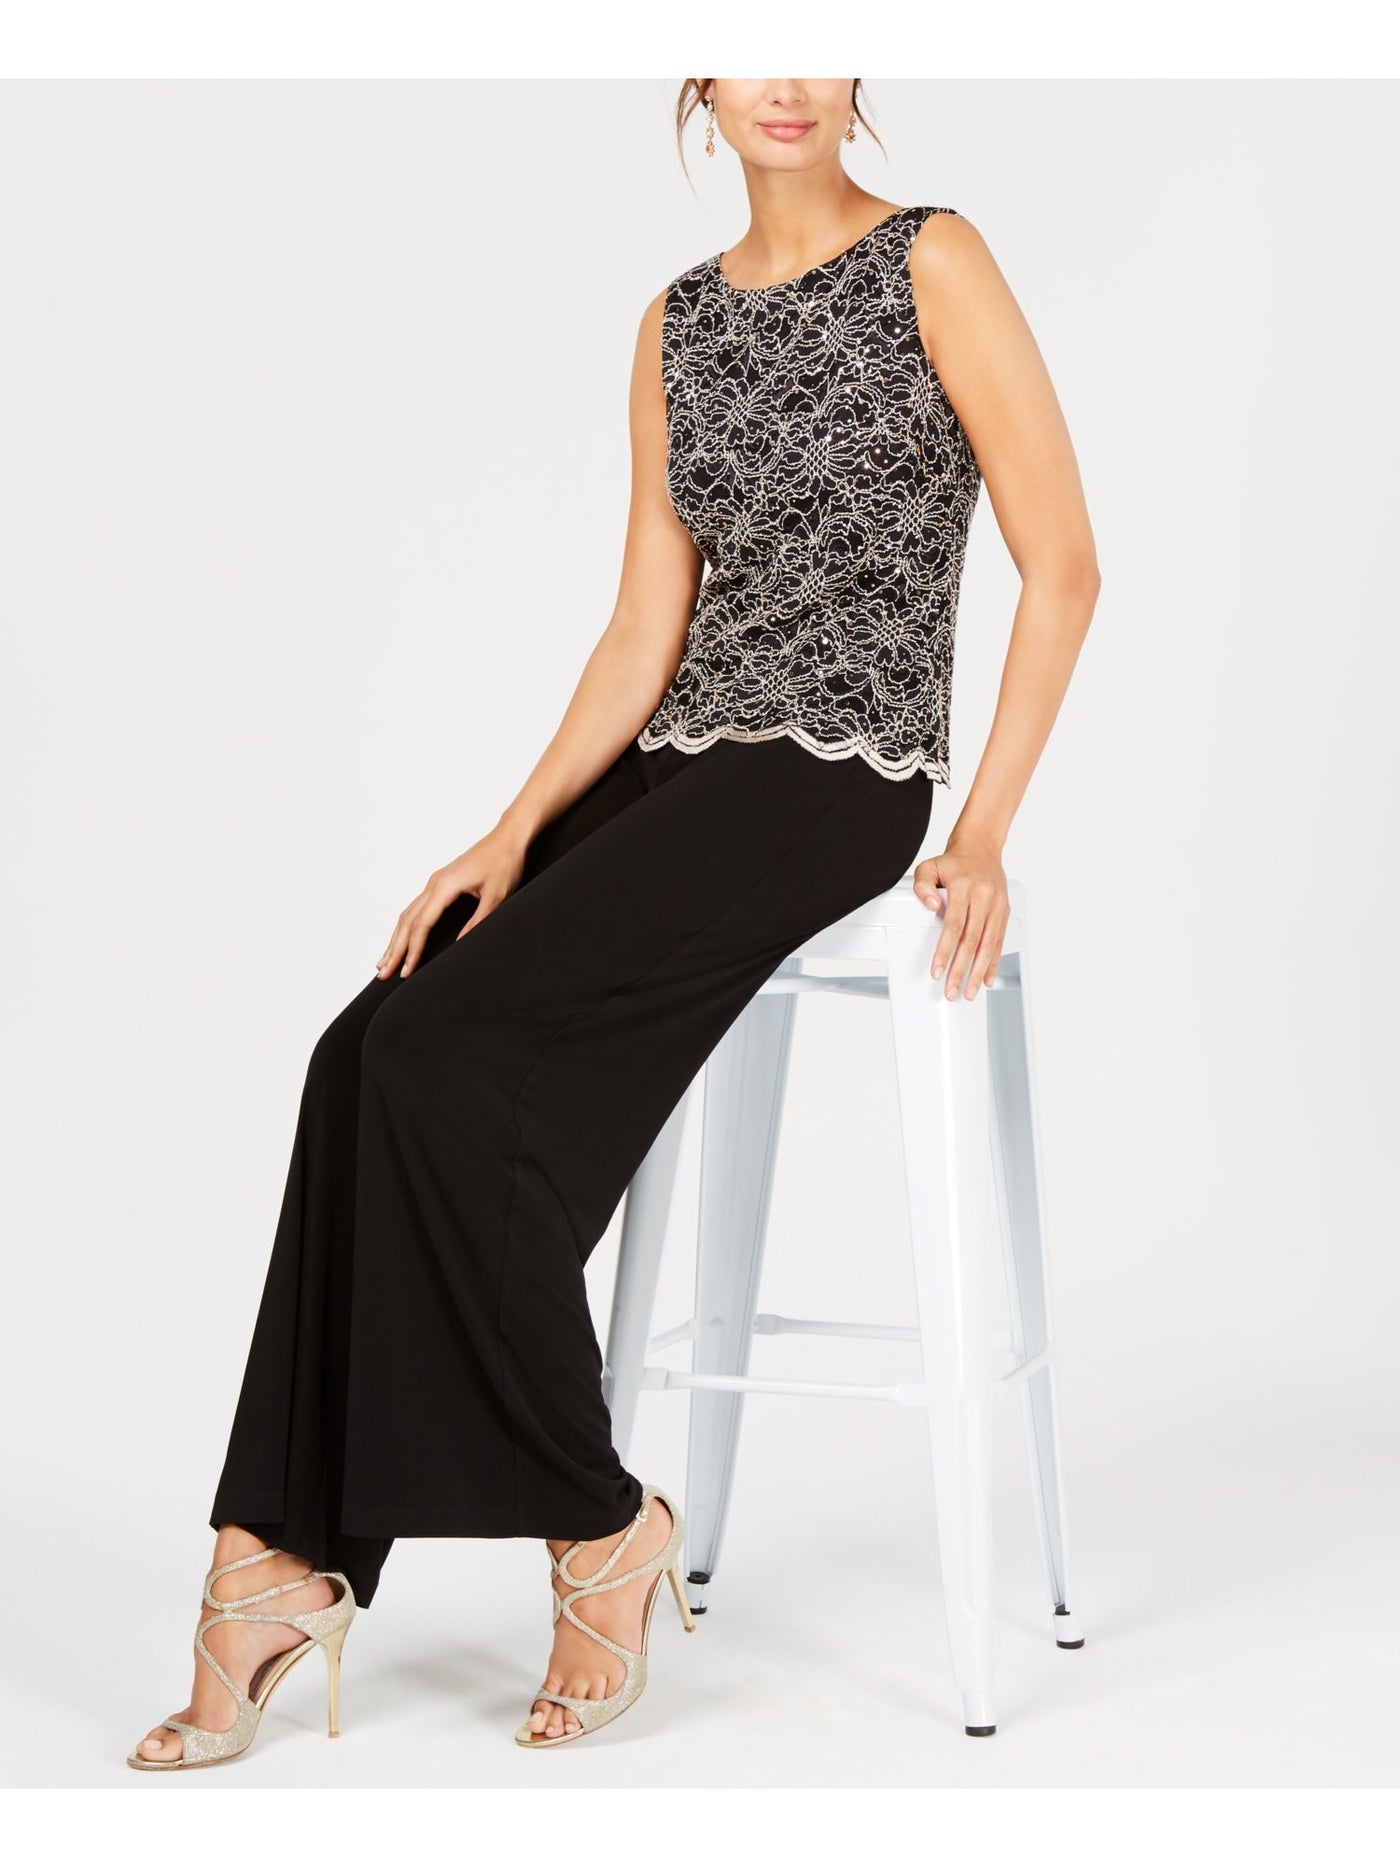 CONNECTED APPAREL Womens Silver Sequined Lace Popover Sleeveless Jewel Neck Evening Wide Leg Jumpsuit 8